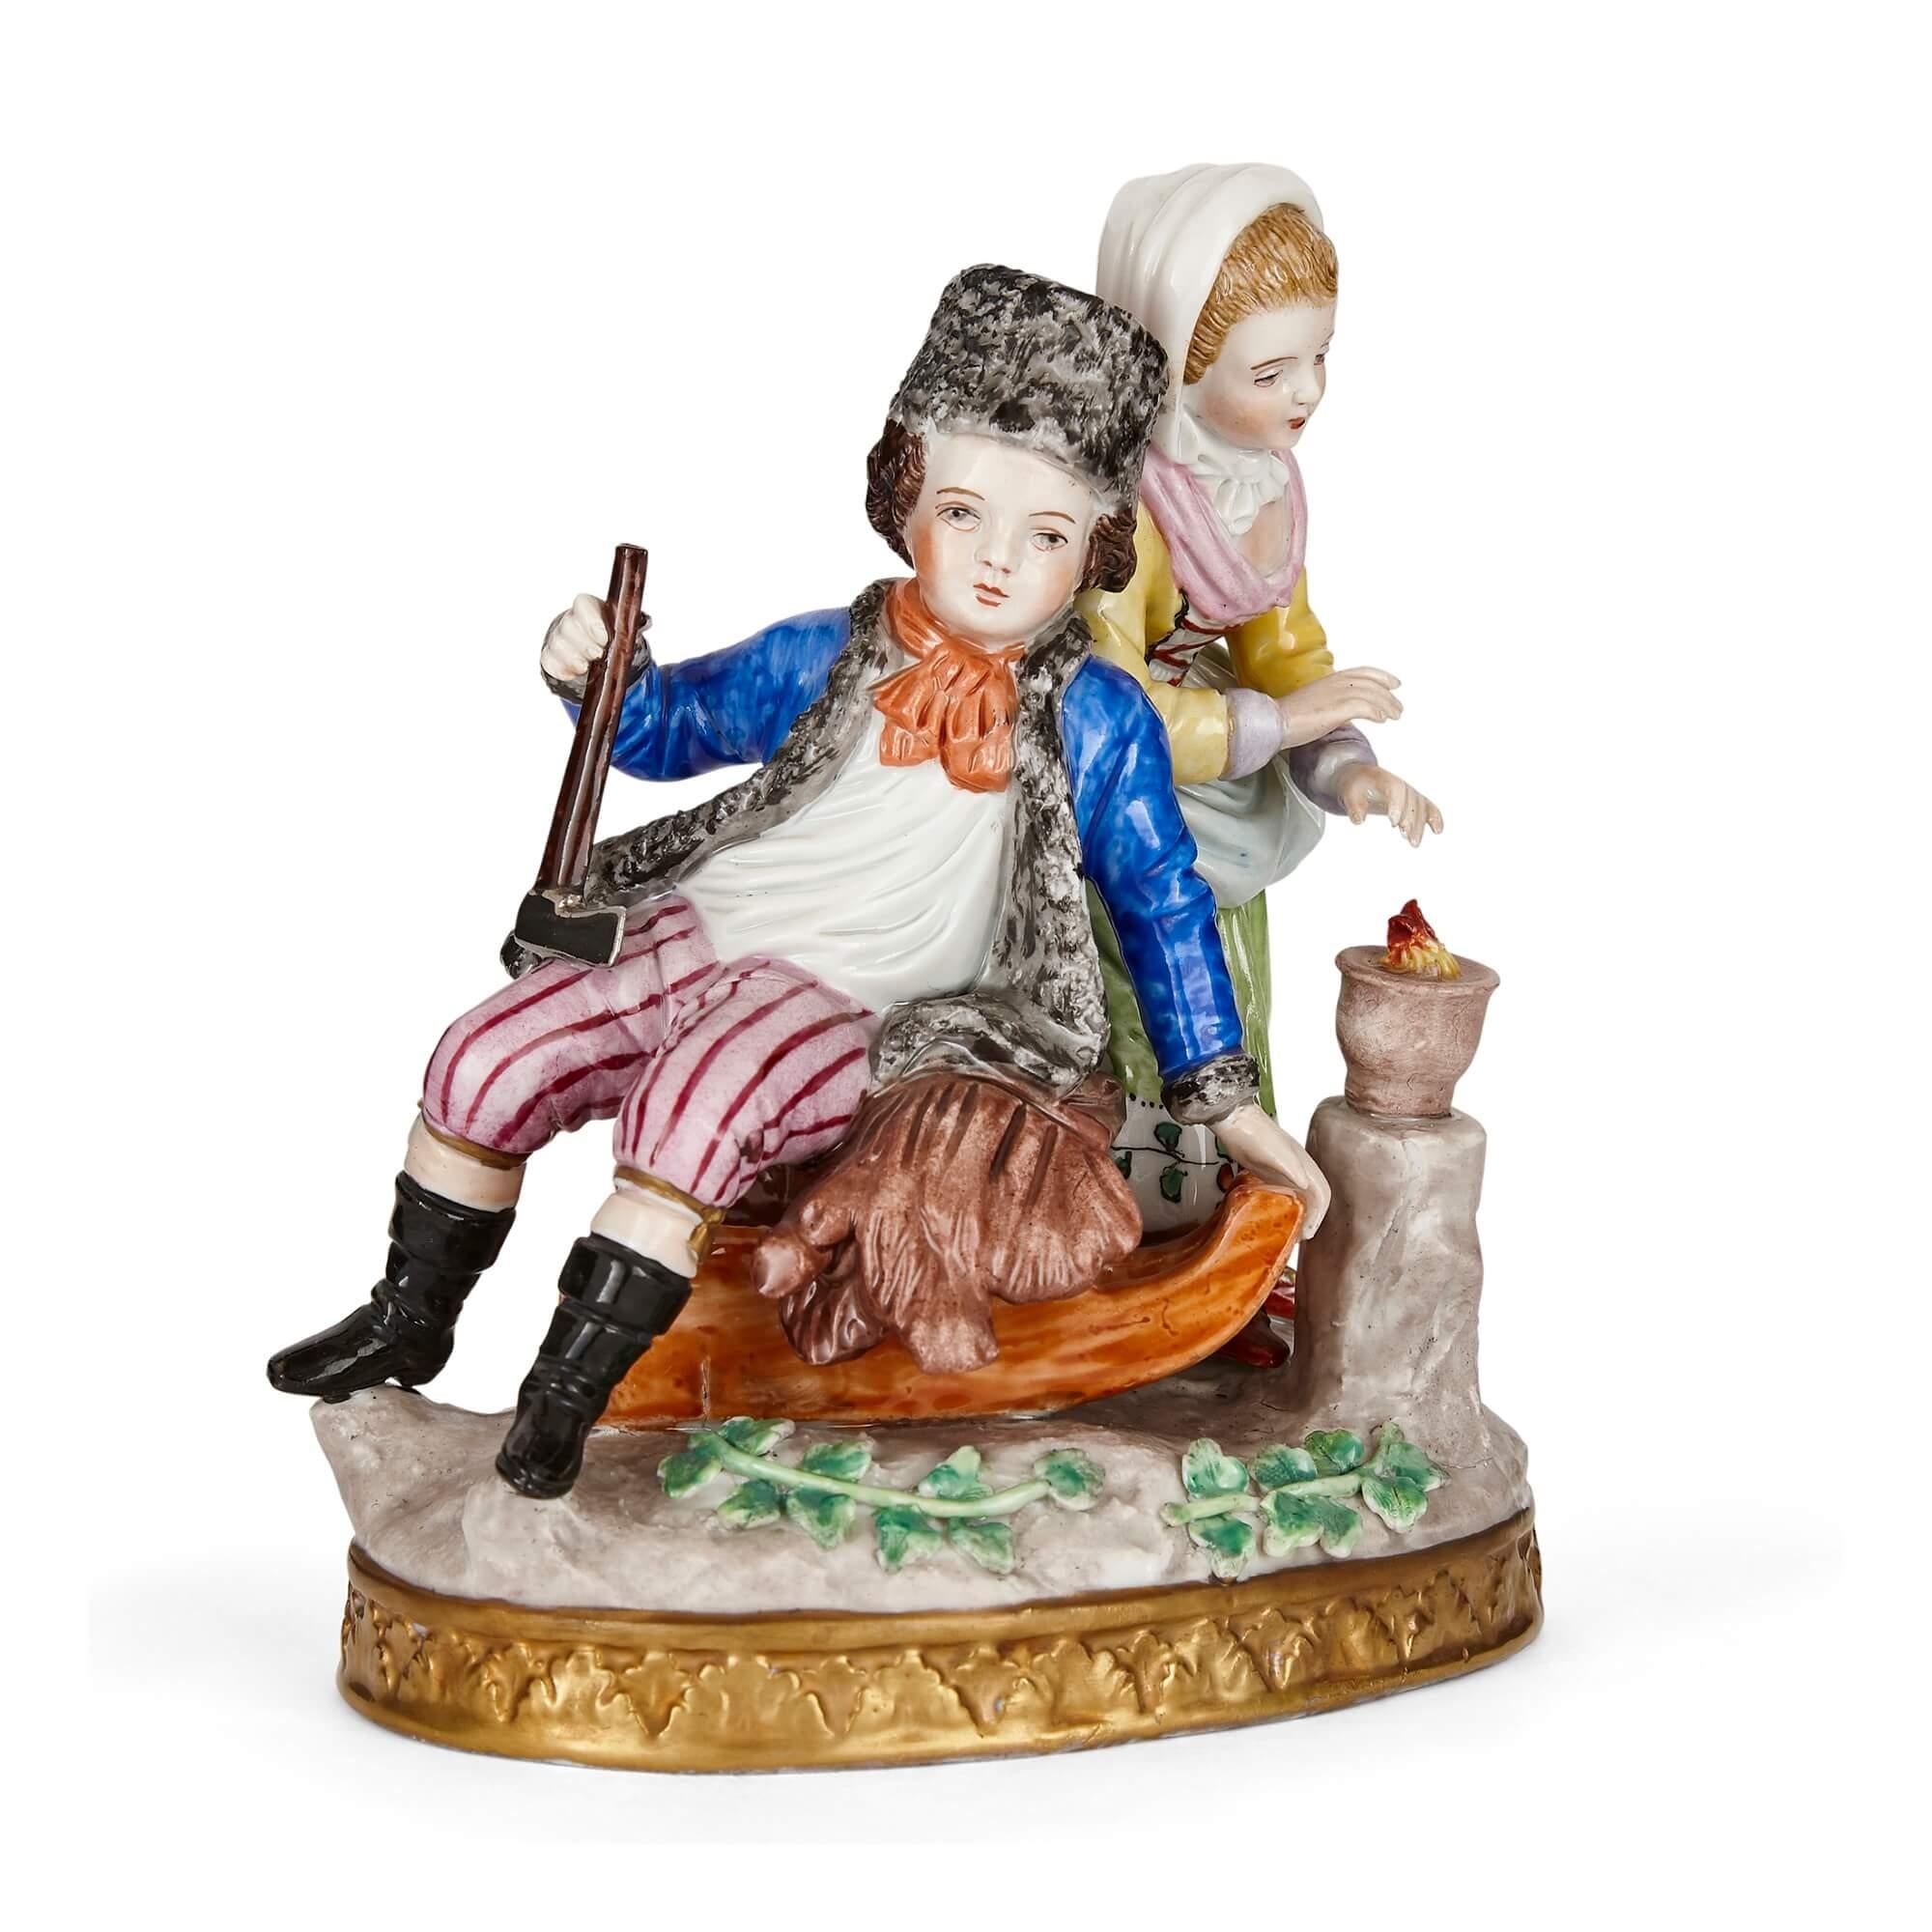 Sitzendorf porcelain group of a young couple
German, c. 1900
Measures: Height 16cm, width 14cm, depth 9cm

This charming and vibrantly coloured porcelain group depicts two figures—one a young boy, the other a young girl—in warm winter dress. The